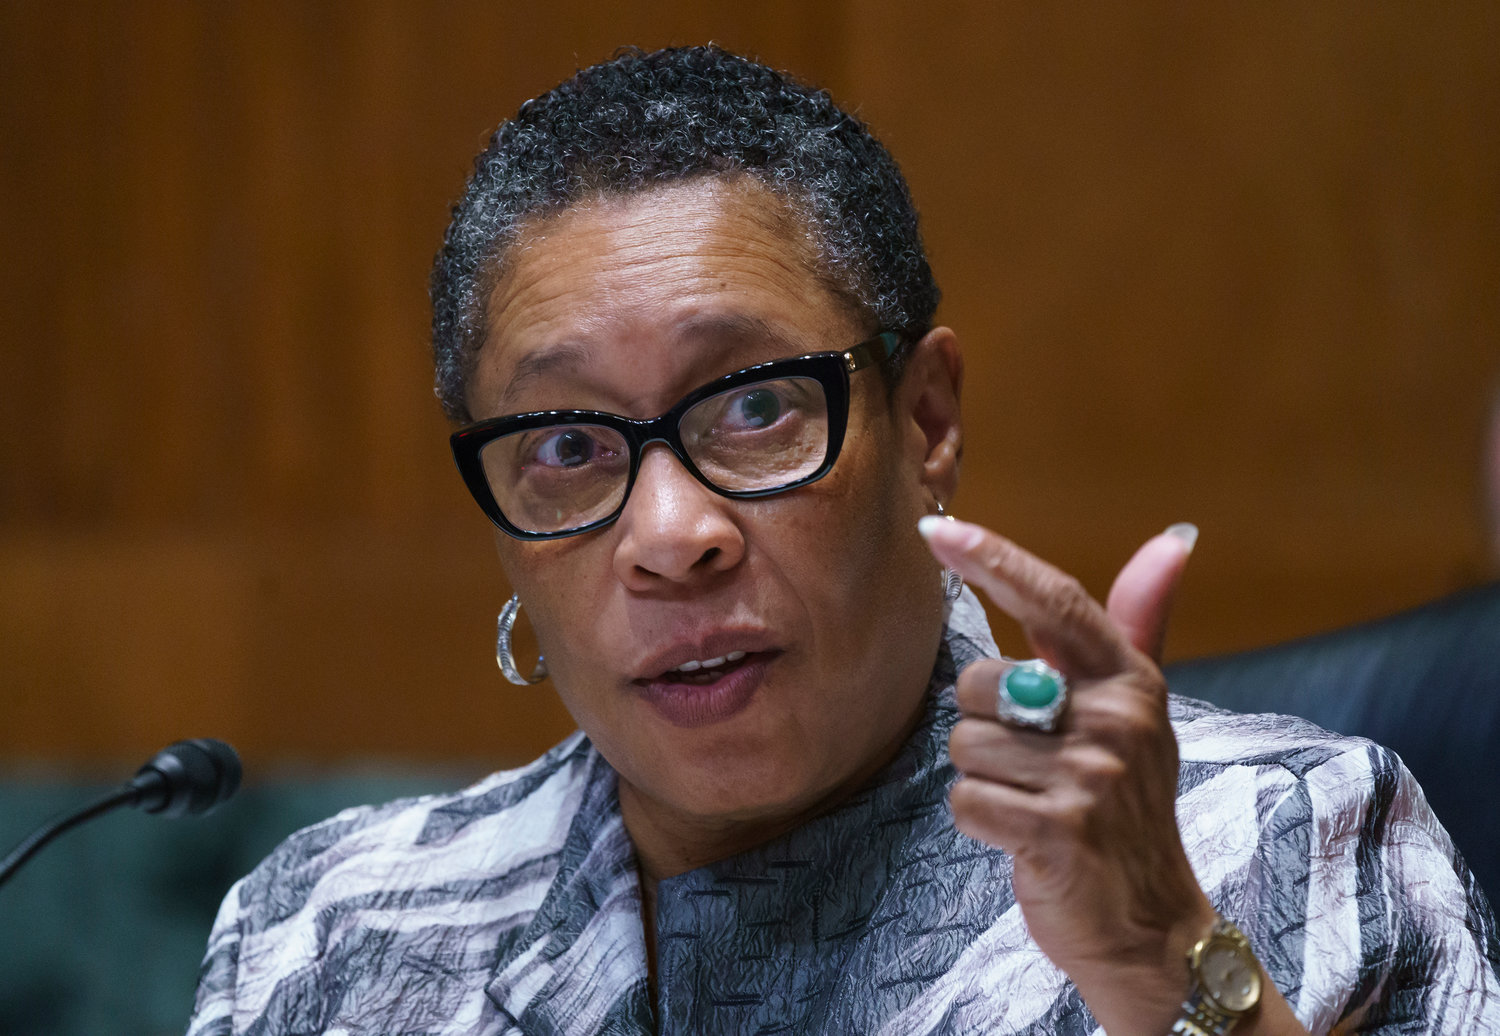 Housing and Urban Development Secretary Marcia Fudge testifies before the Senate Appropriations Committee on President Joe Biden's budget requests, at the Capitol in Washington, Thursday, June 10, 2021.